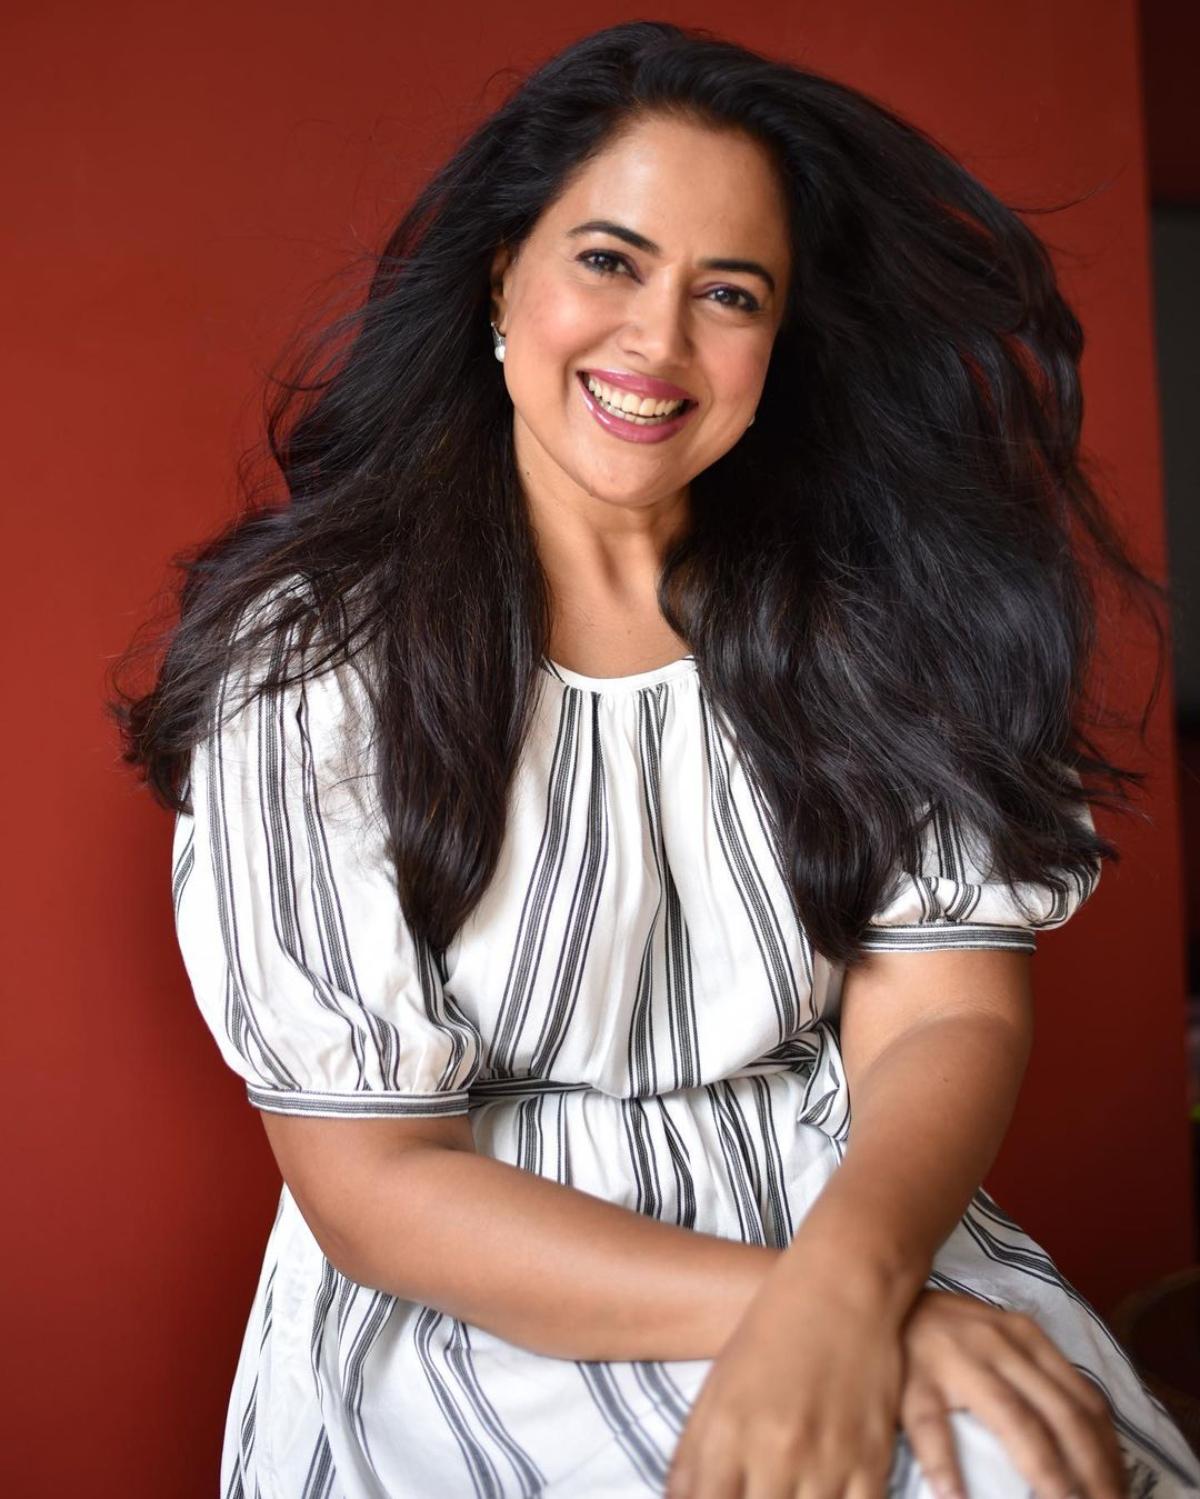 Sameera Reddy was born on 14 December, 1978 in Mumbai. While her father Chitrapoli Reddy, who is from Andhra Pradesh, is a businessman, her Mangalorean mother Nakshatra Reddy is a qualified microbiologist and a fengshui practitioner. Sameera has two siblings namely Meghna Reddy and Sushama Reddy, who apparently are associated to the glamour world